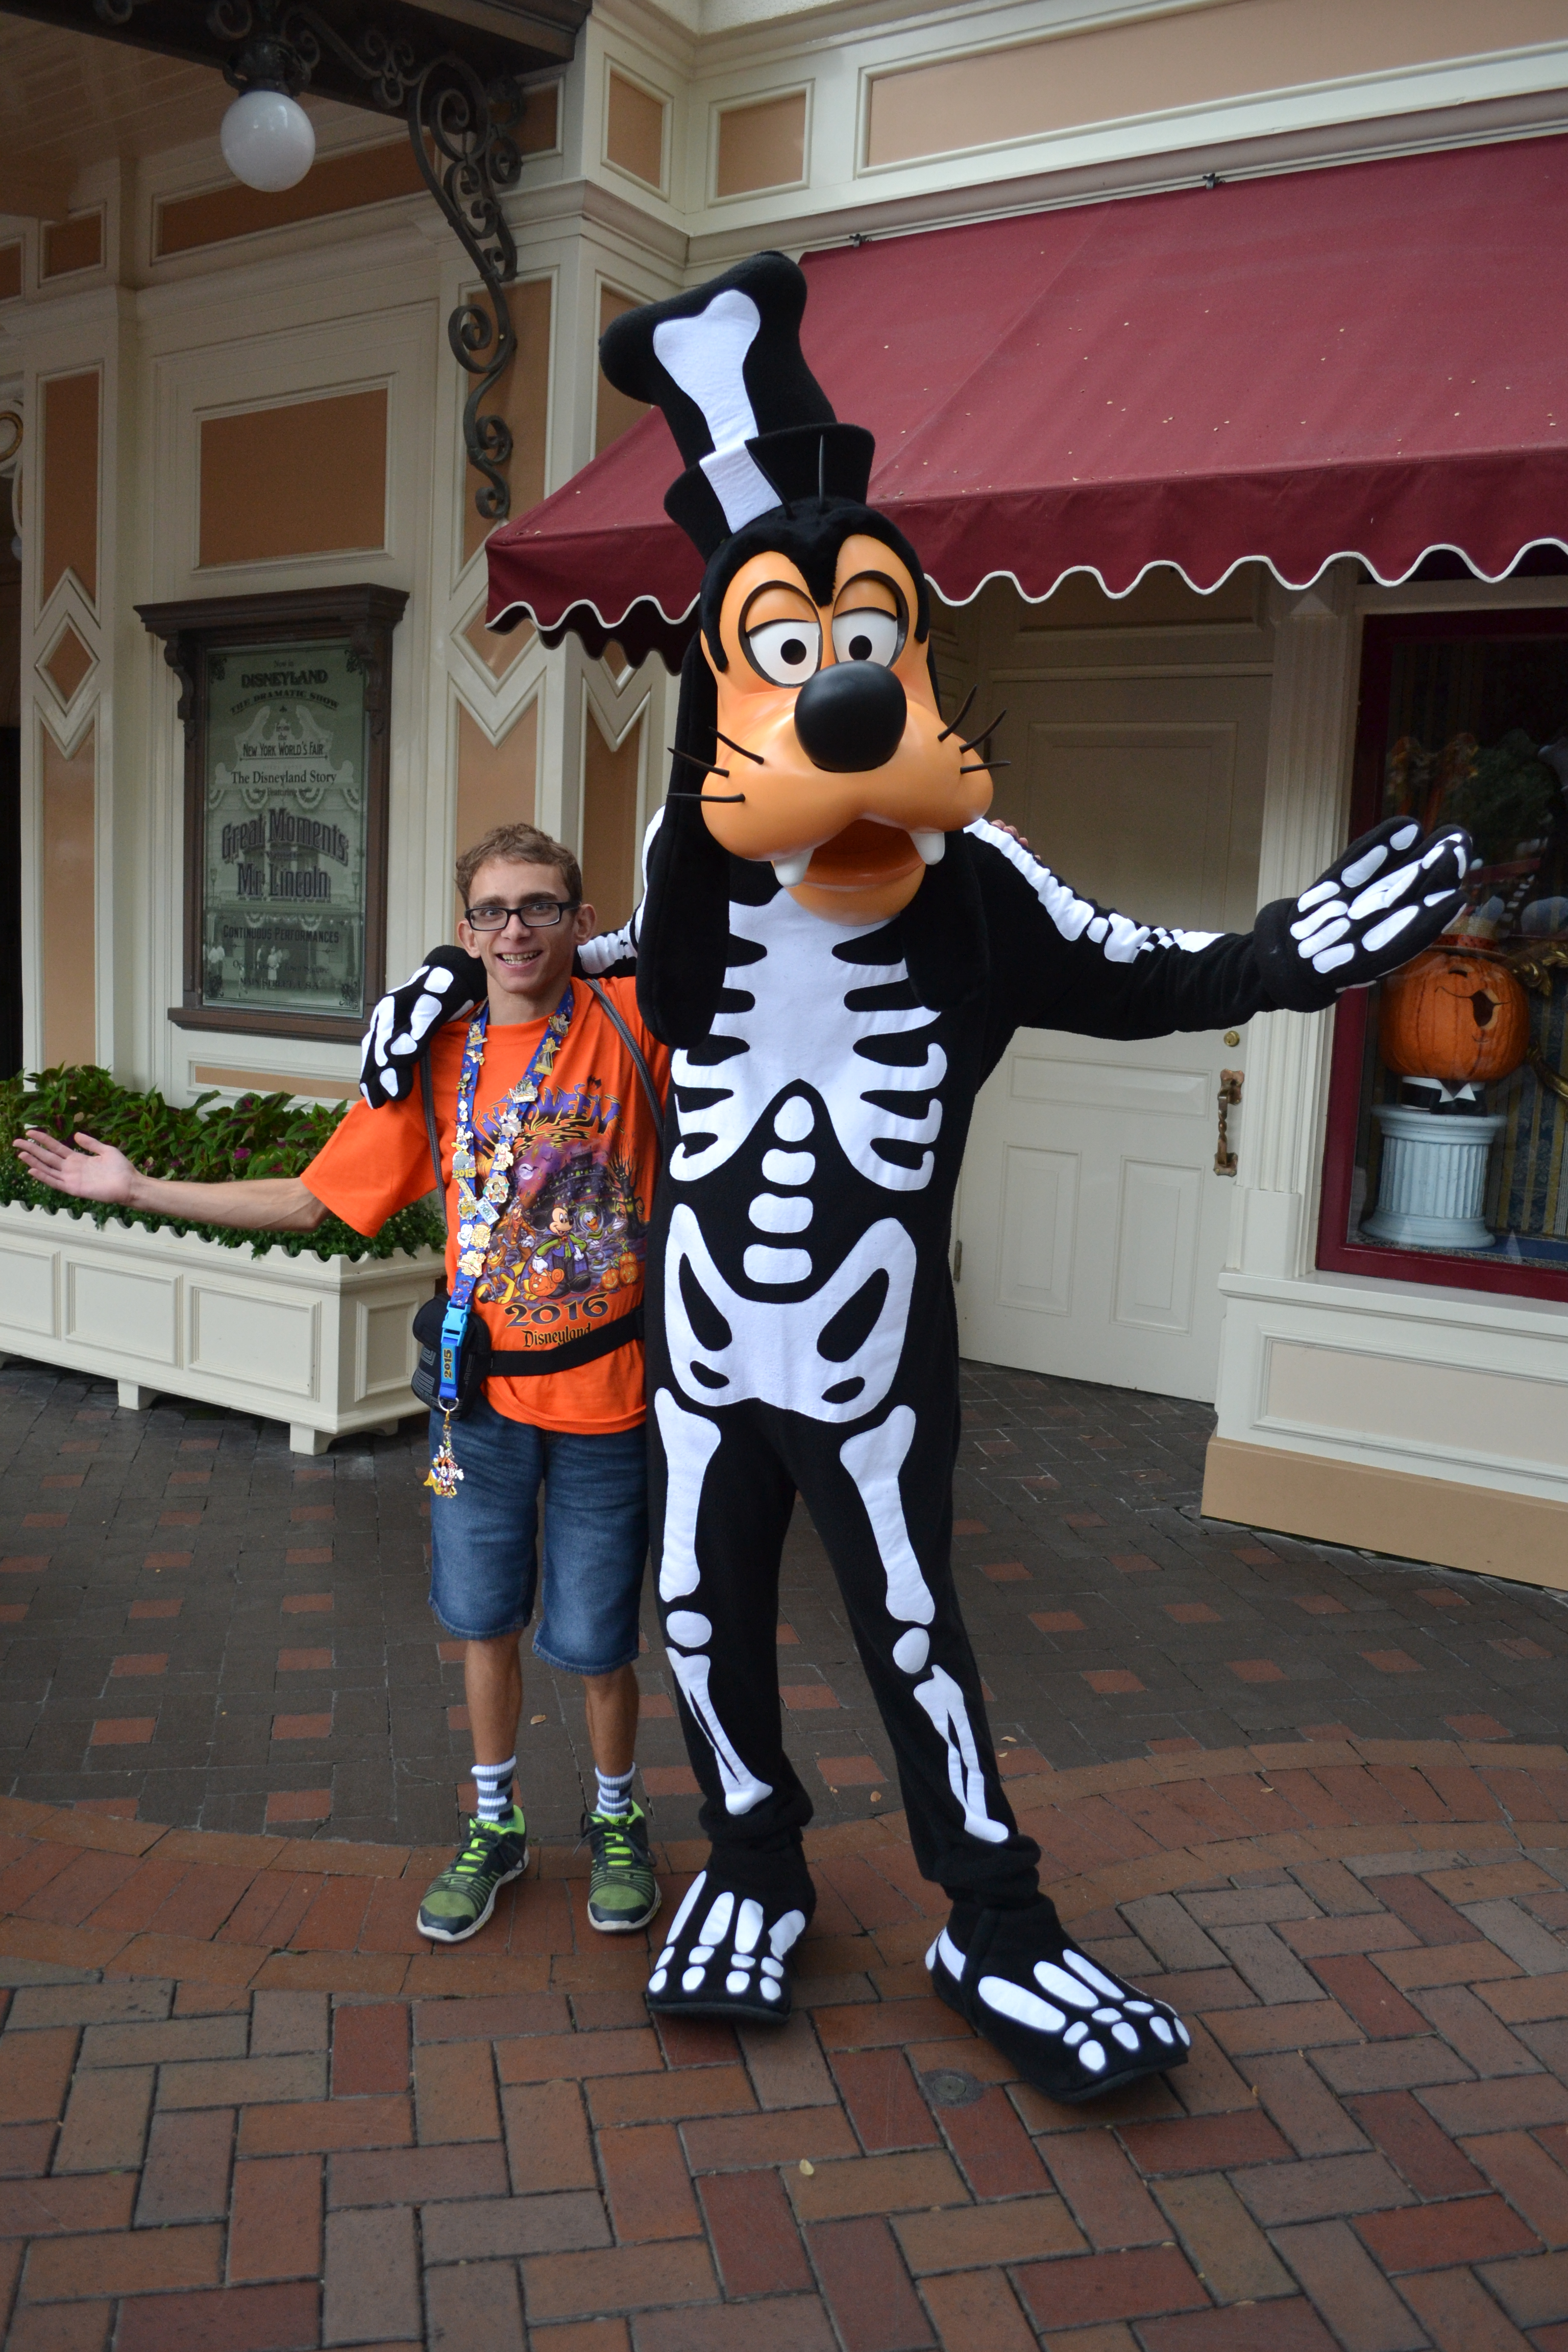 Vacationer enjoying a photo opportunity during the Halloween Celebration